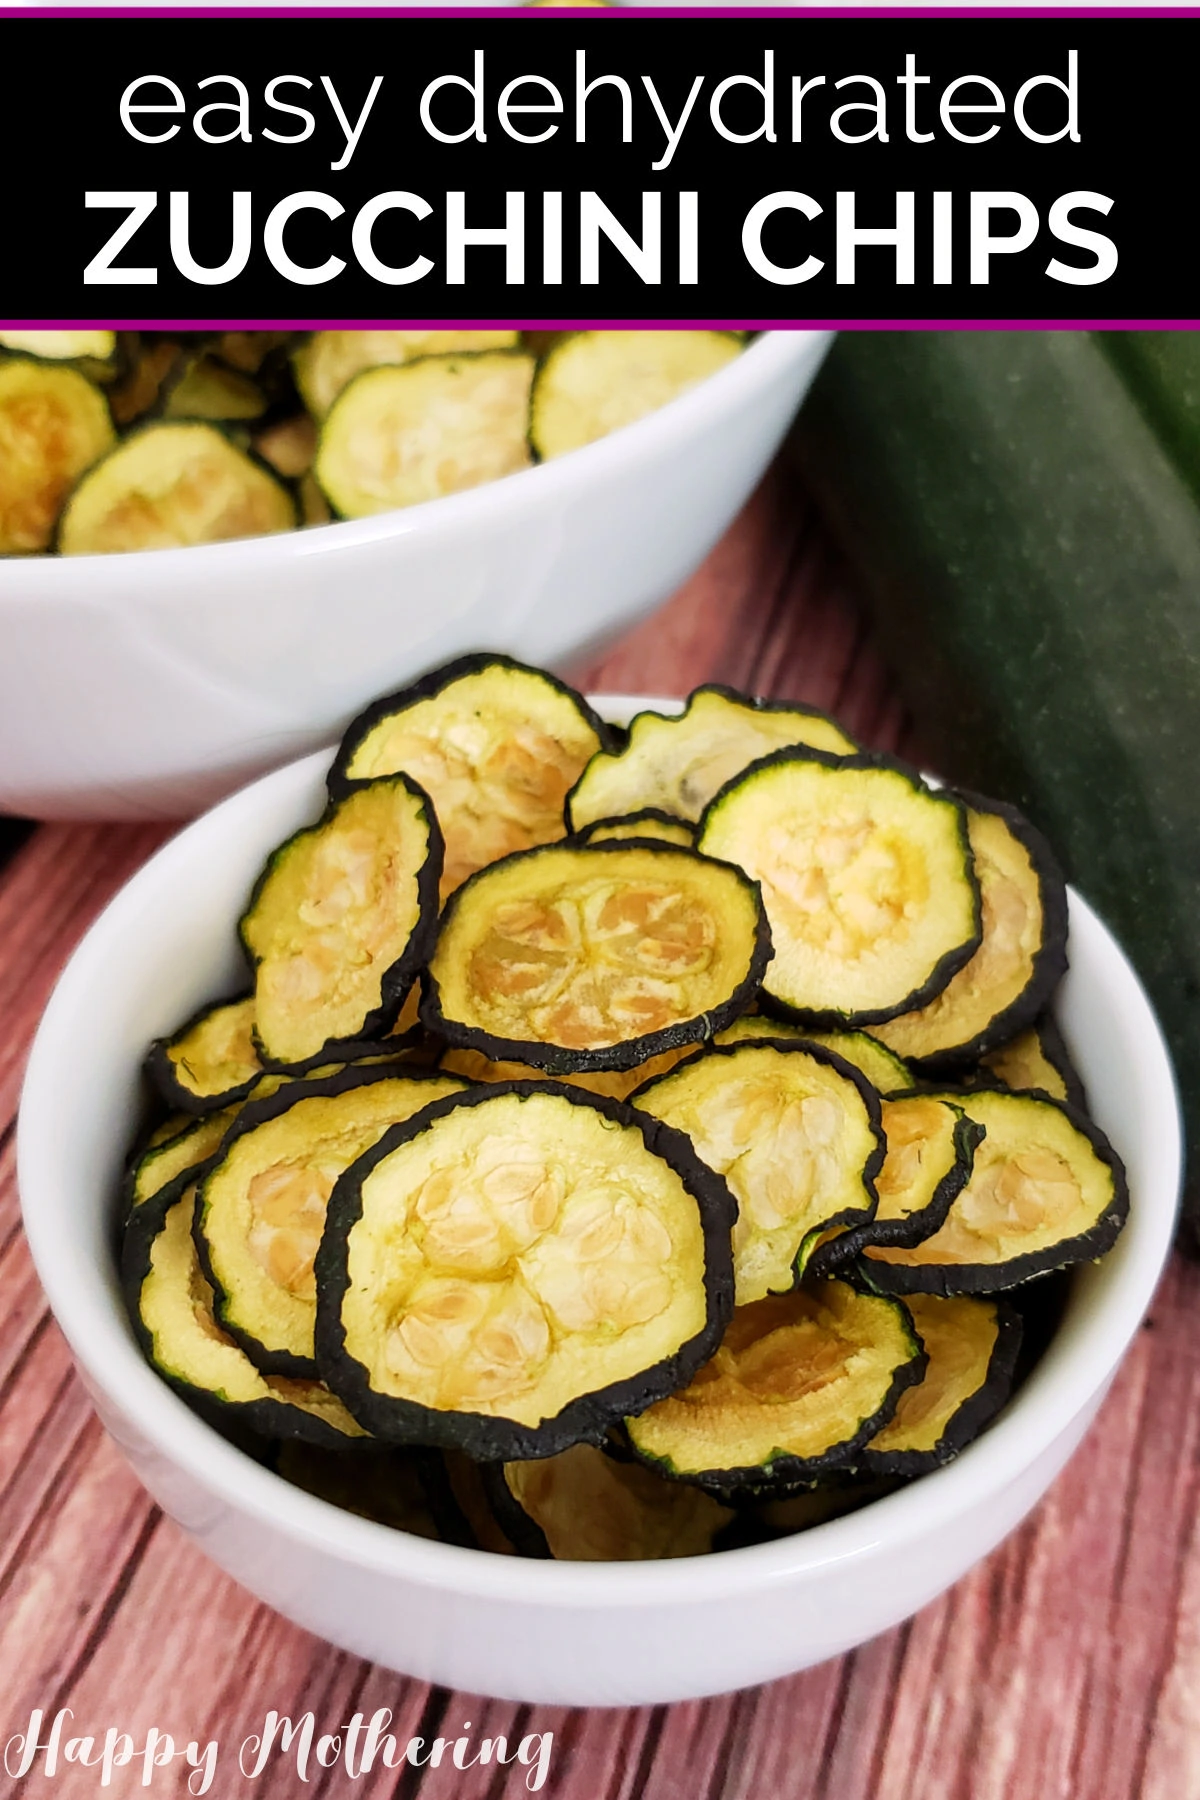 Dehydrated zucchini chips served in white bowl as snack.